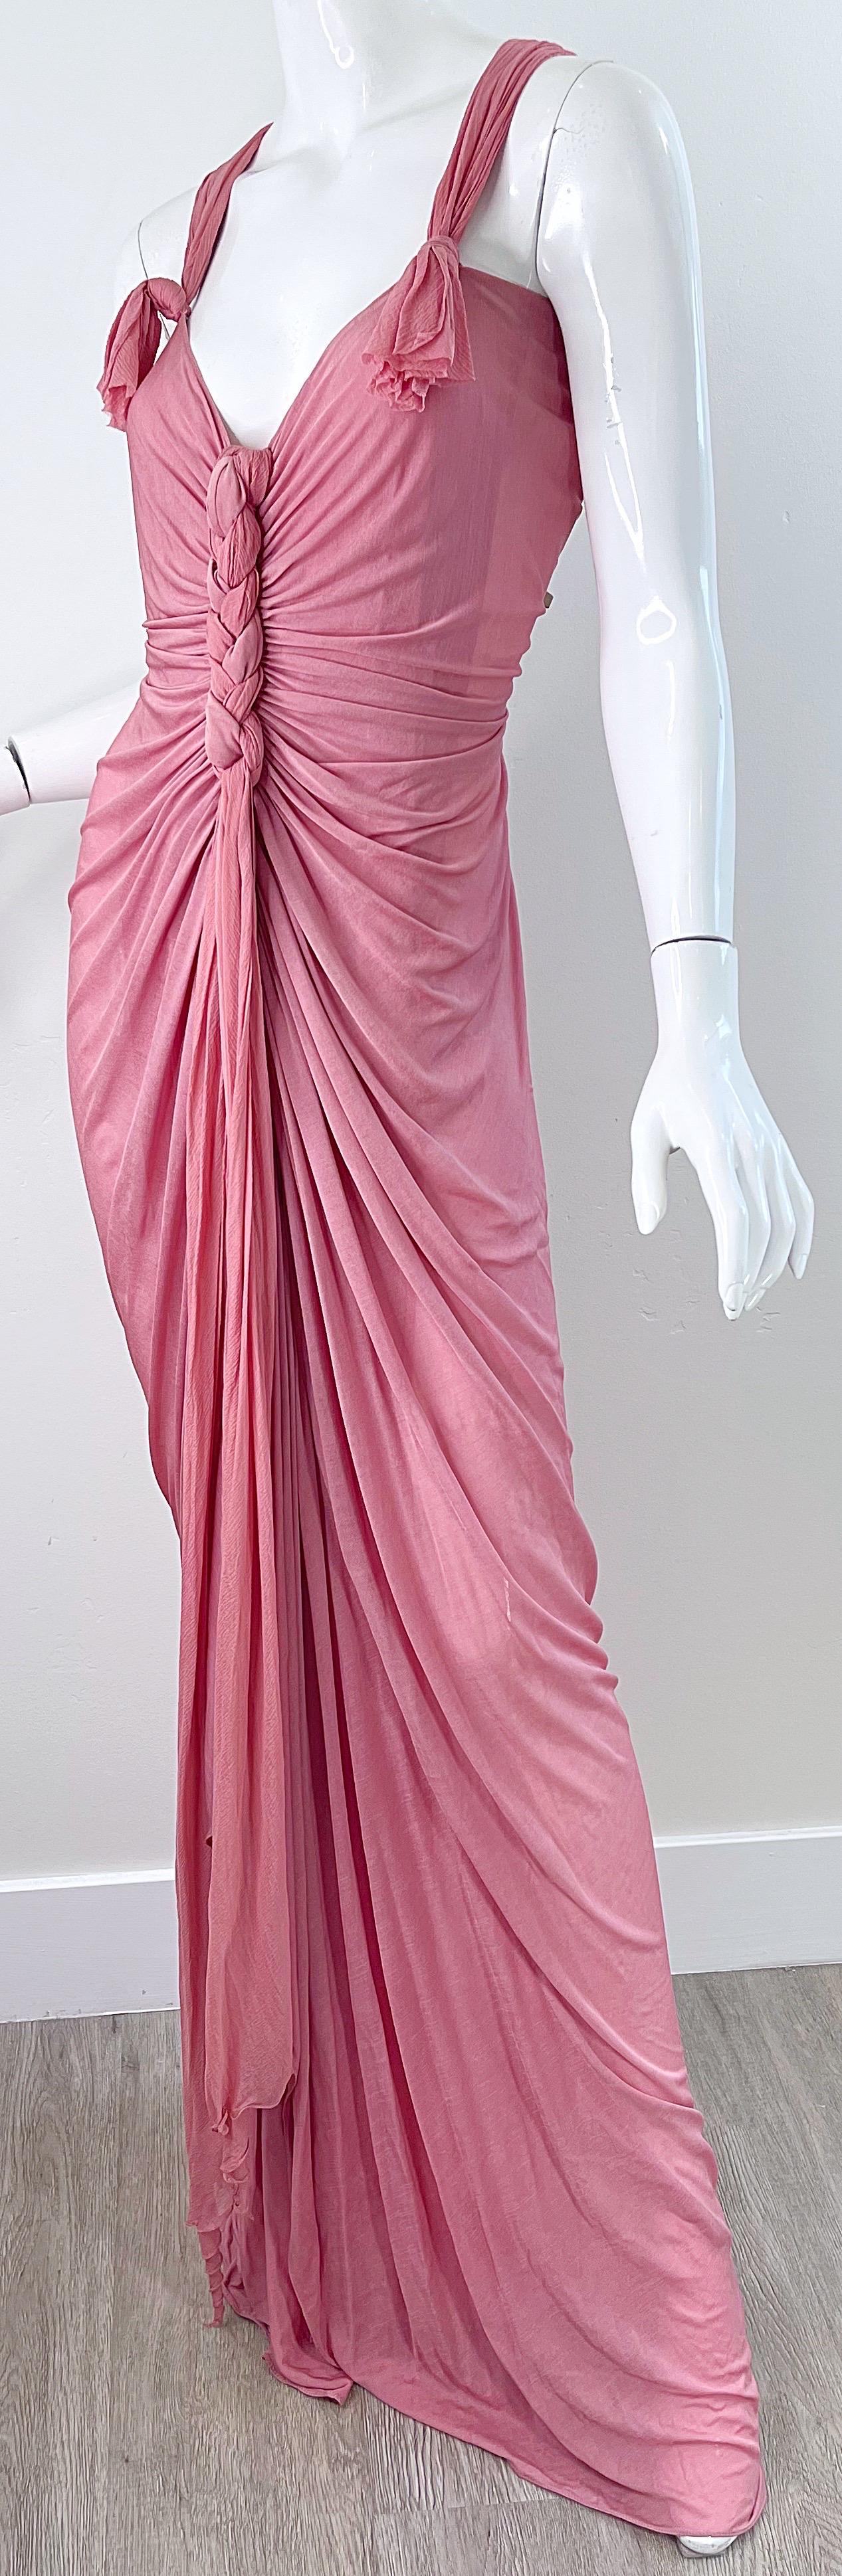 NWT Donna Karan Fall 2005 Pink Dusty Rose Mauve 30s Style Semi Sheer Gown Dress For Sale 2